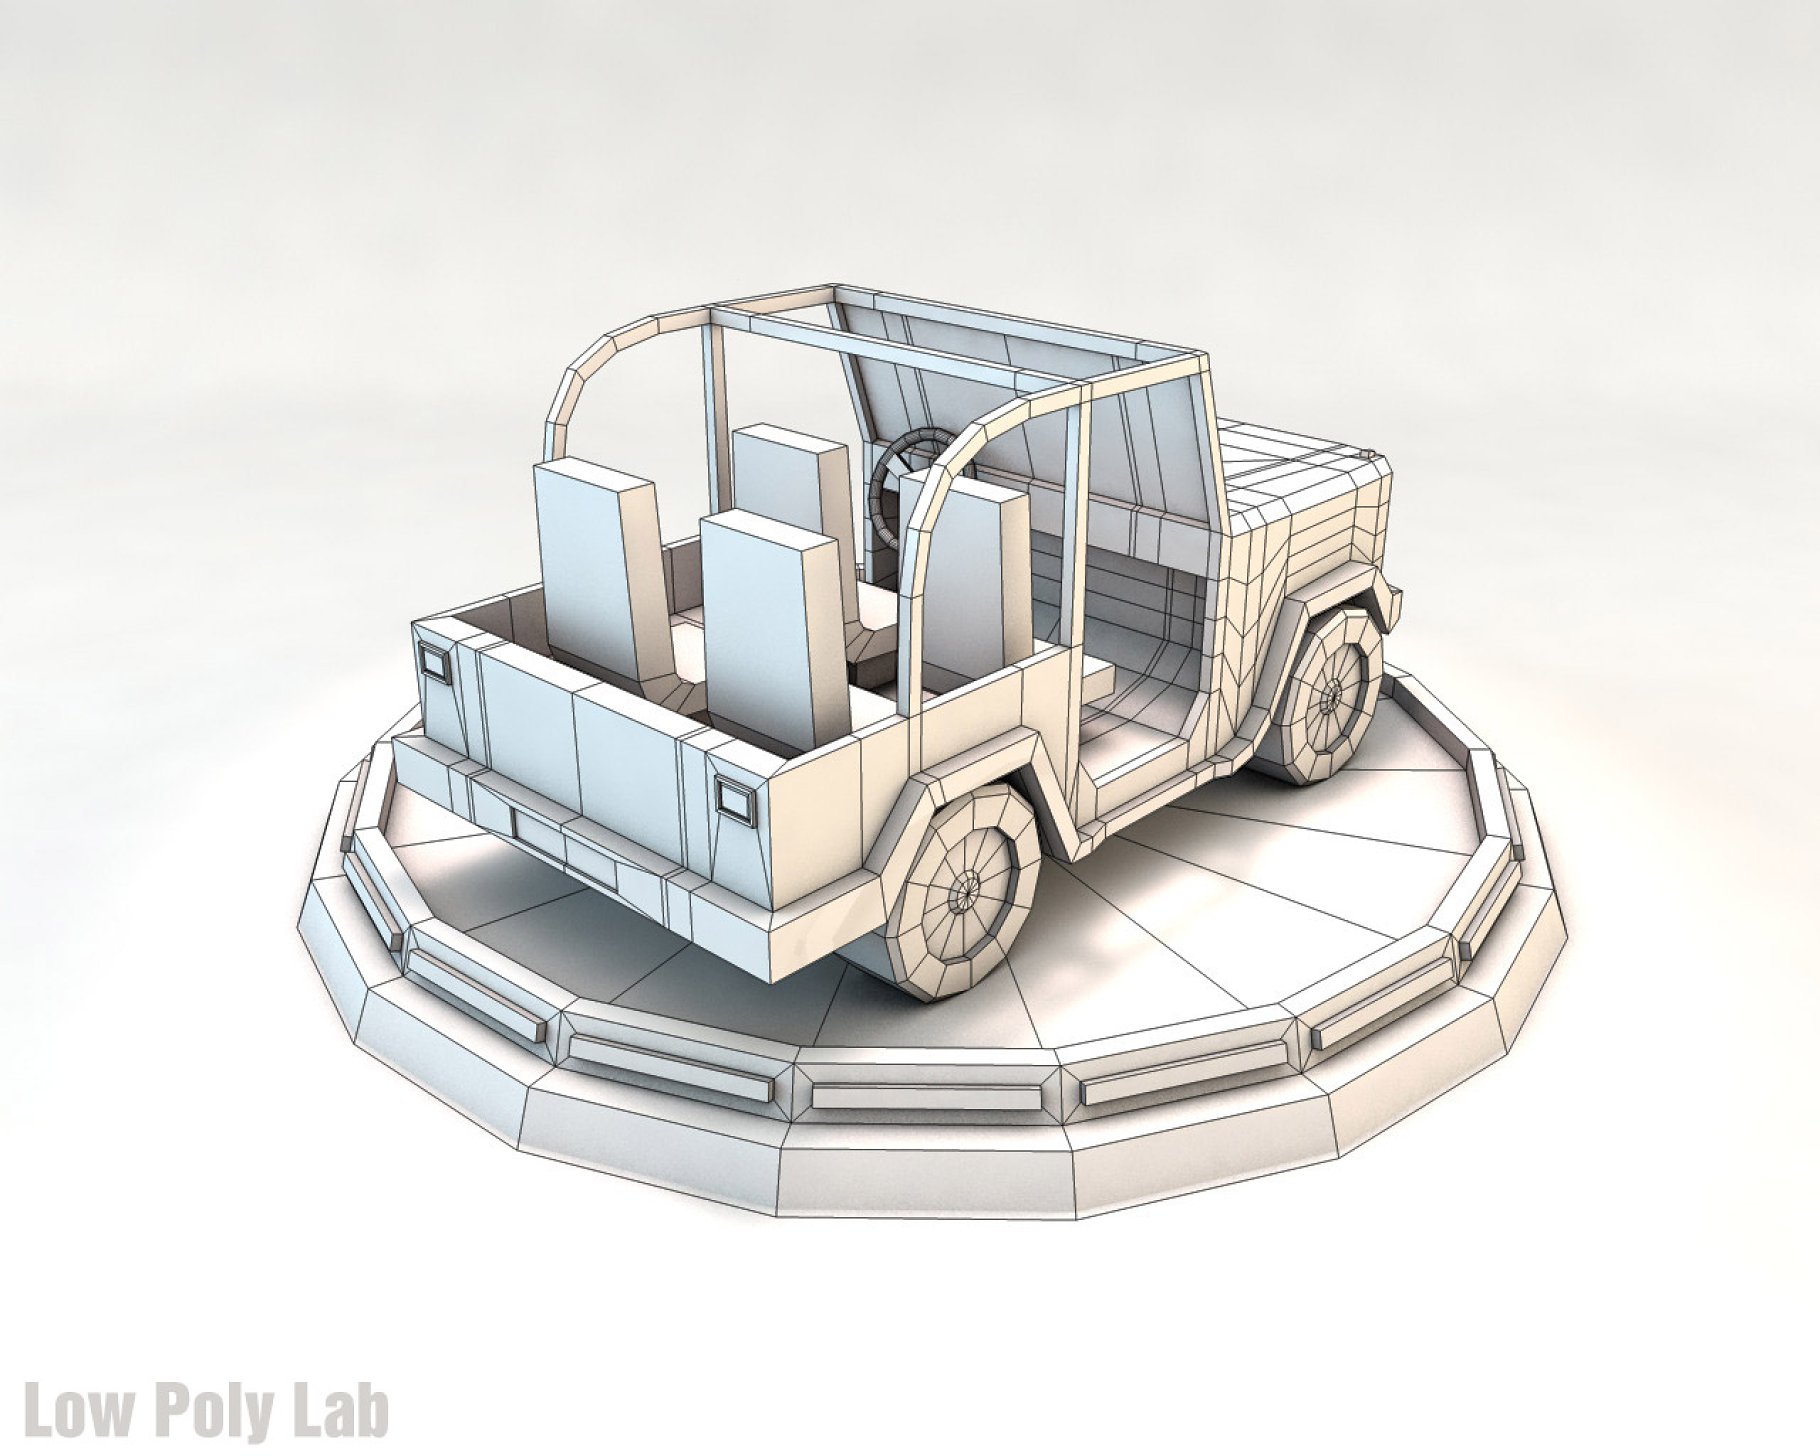 Gray low poly car jeep back graphic mockup in orange on a gray background.